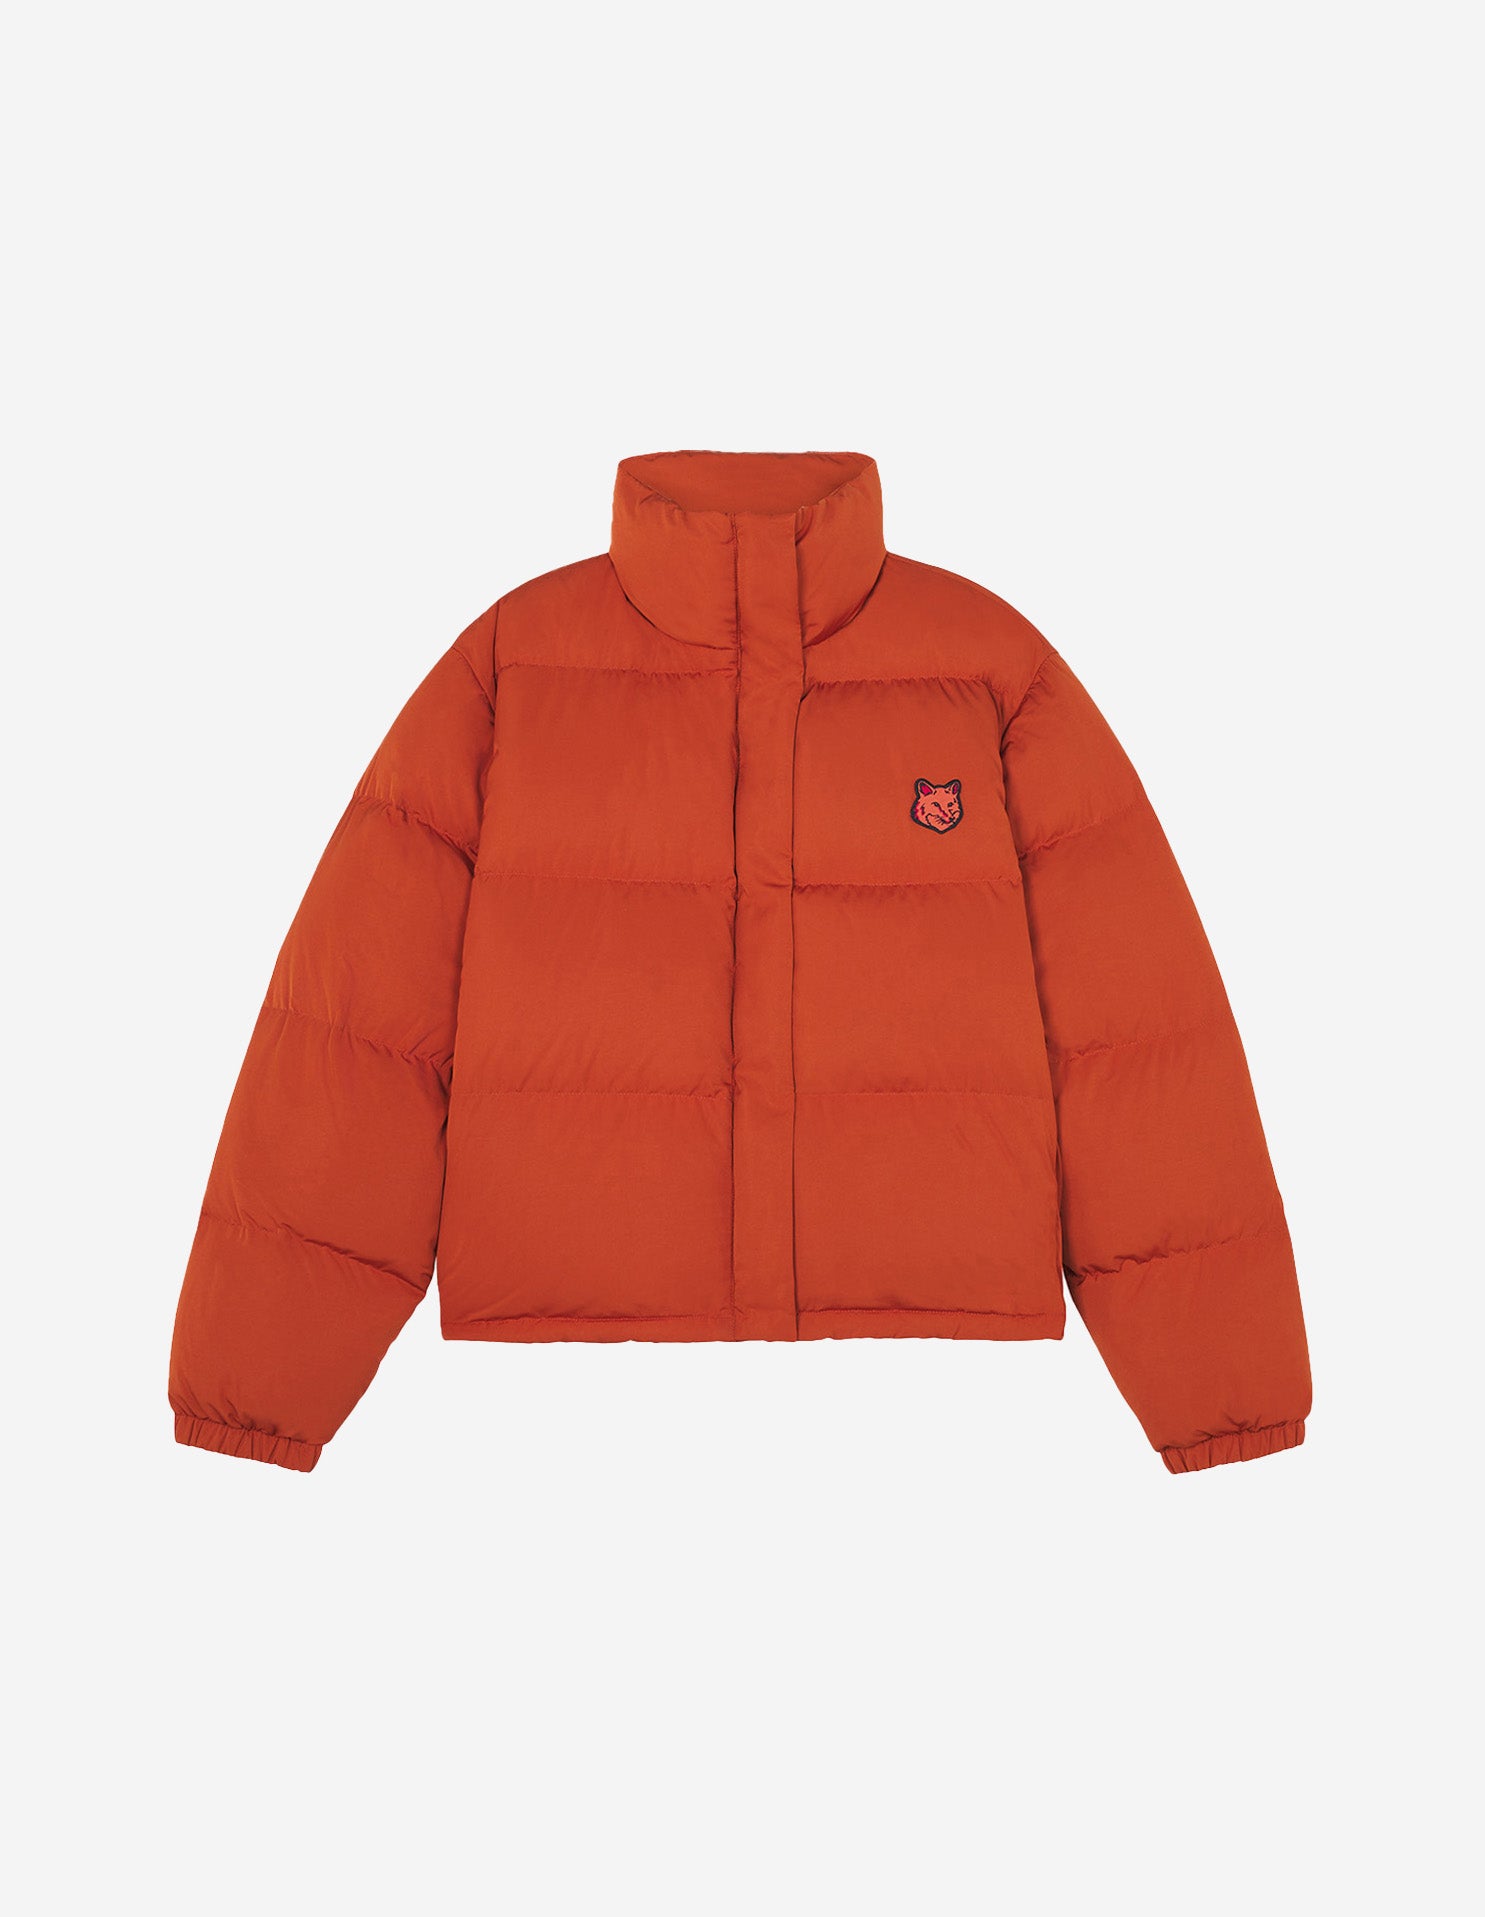 Maison Kitsune Women's Cropped Puffer In Nylon With Bold Fox Head Patch Clay LW02207WQ4016 P898